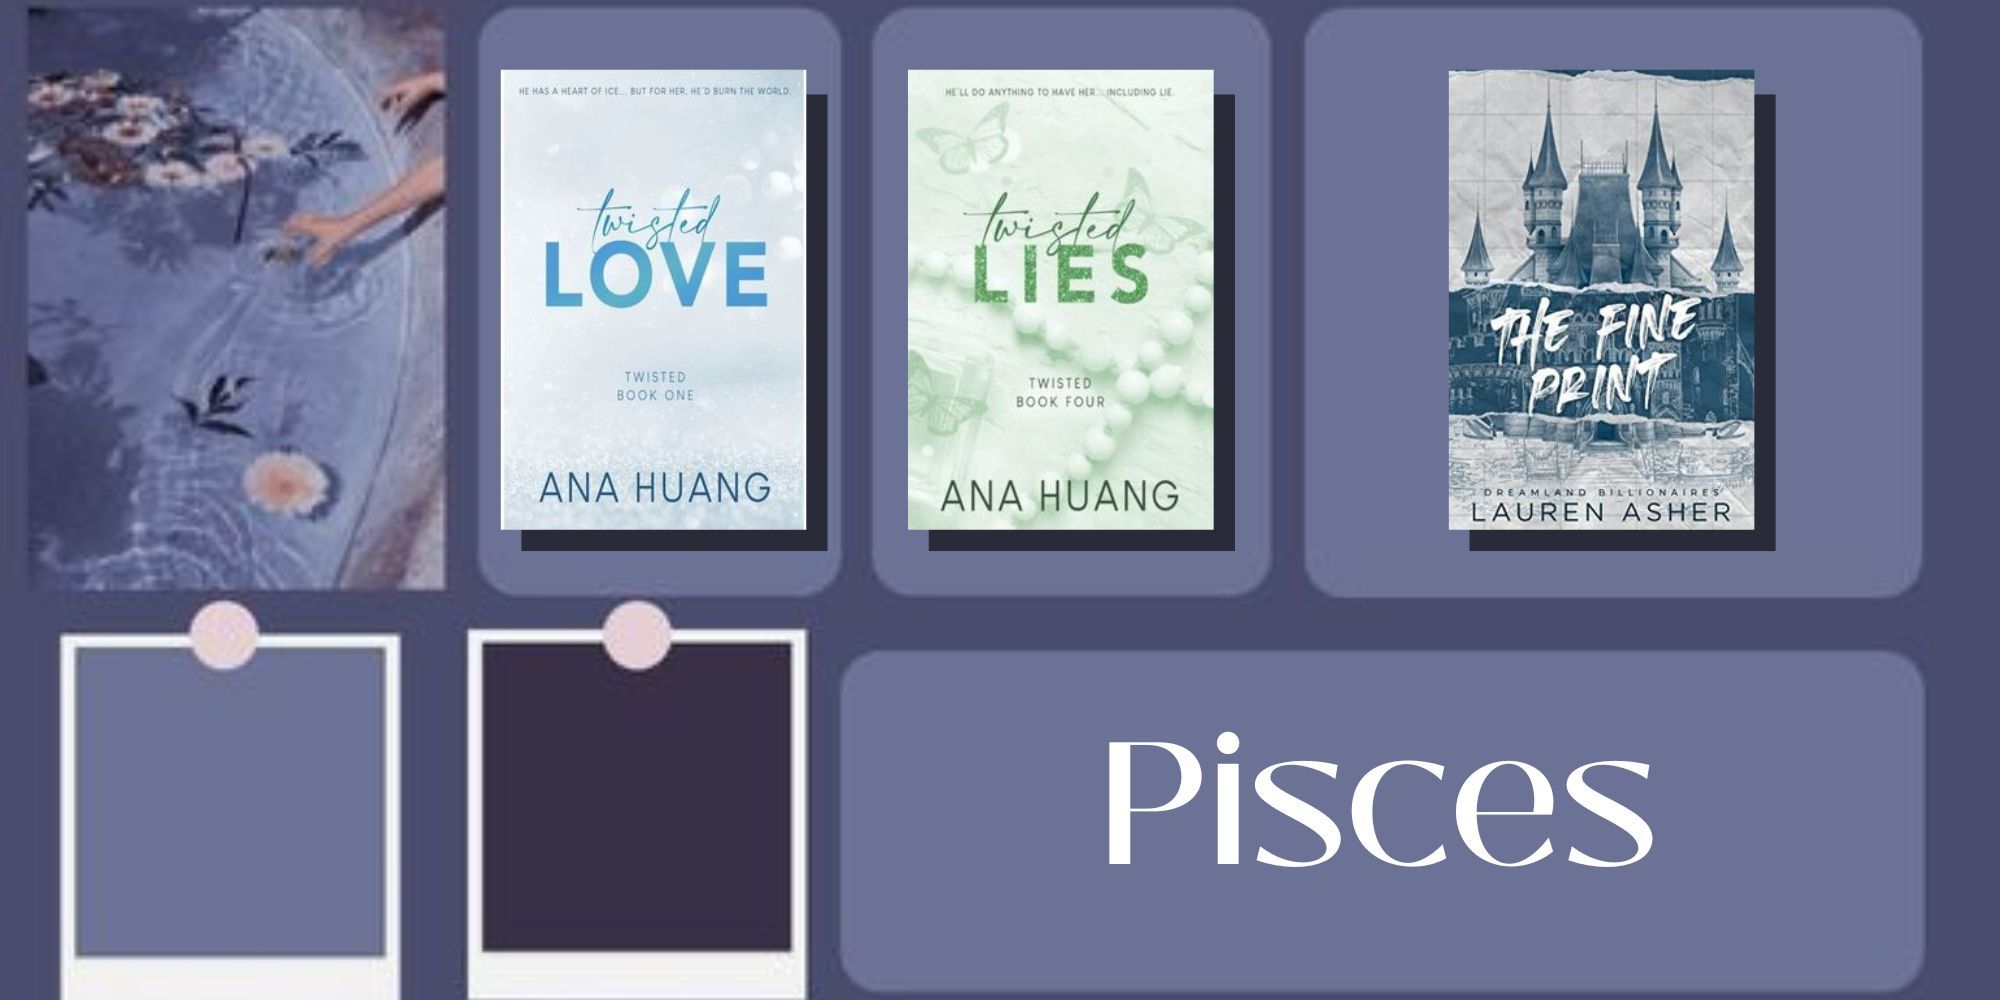 Best Book Recommendations for Pisces